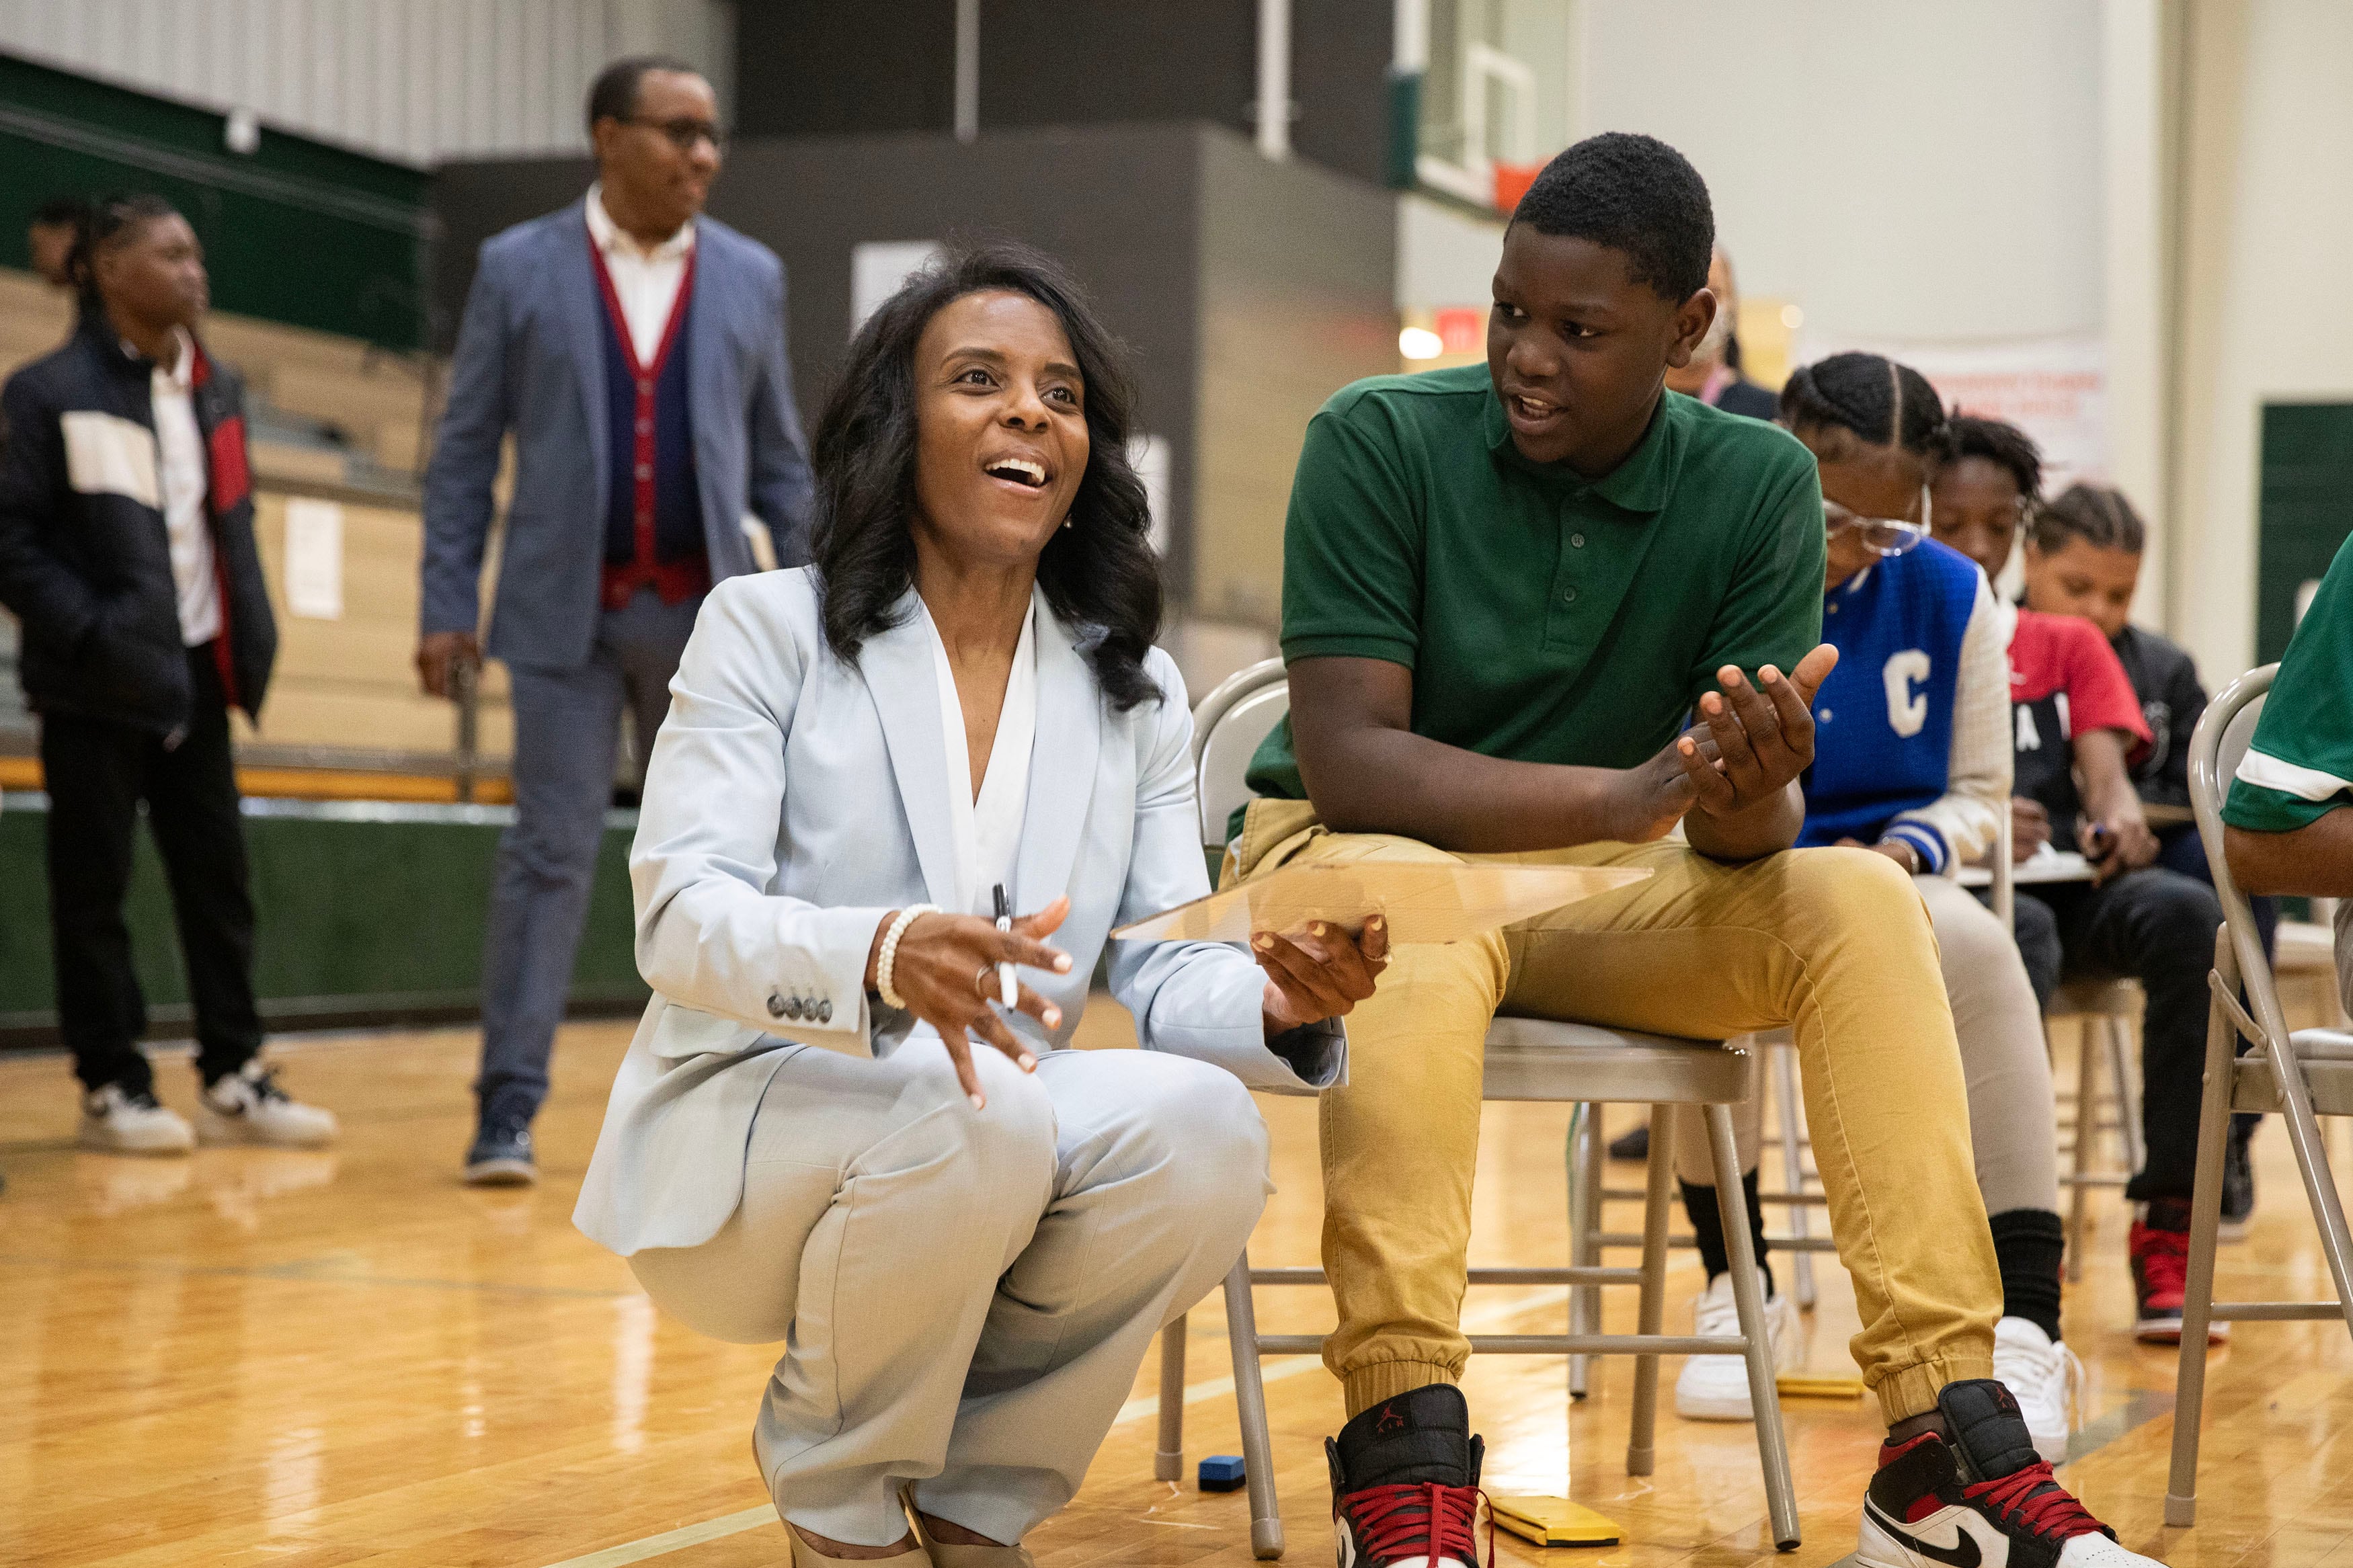 A woman with short dark hair and wearing a light blue suit kneels beside a young student wearing a green shirt and tan pants and sitting in a chair in a school gym.